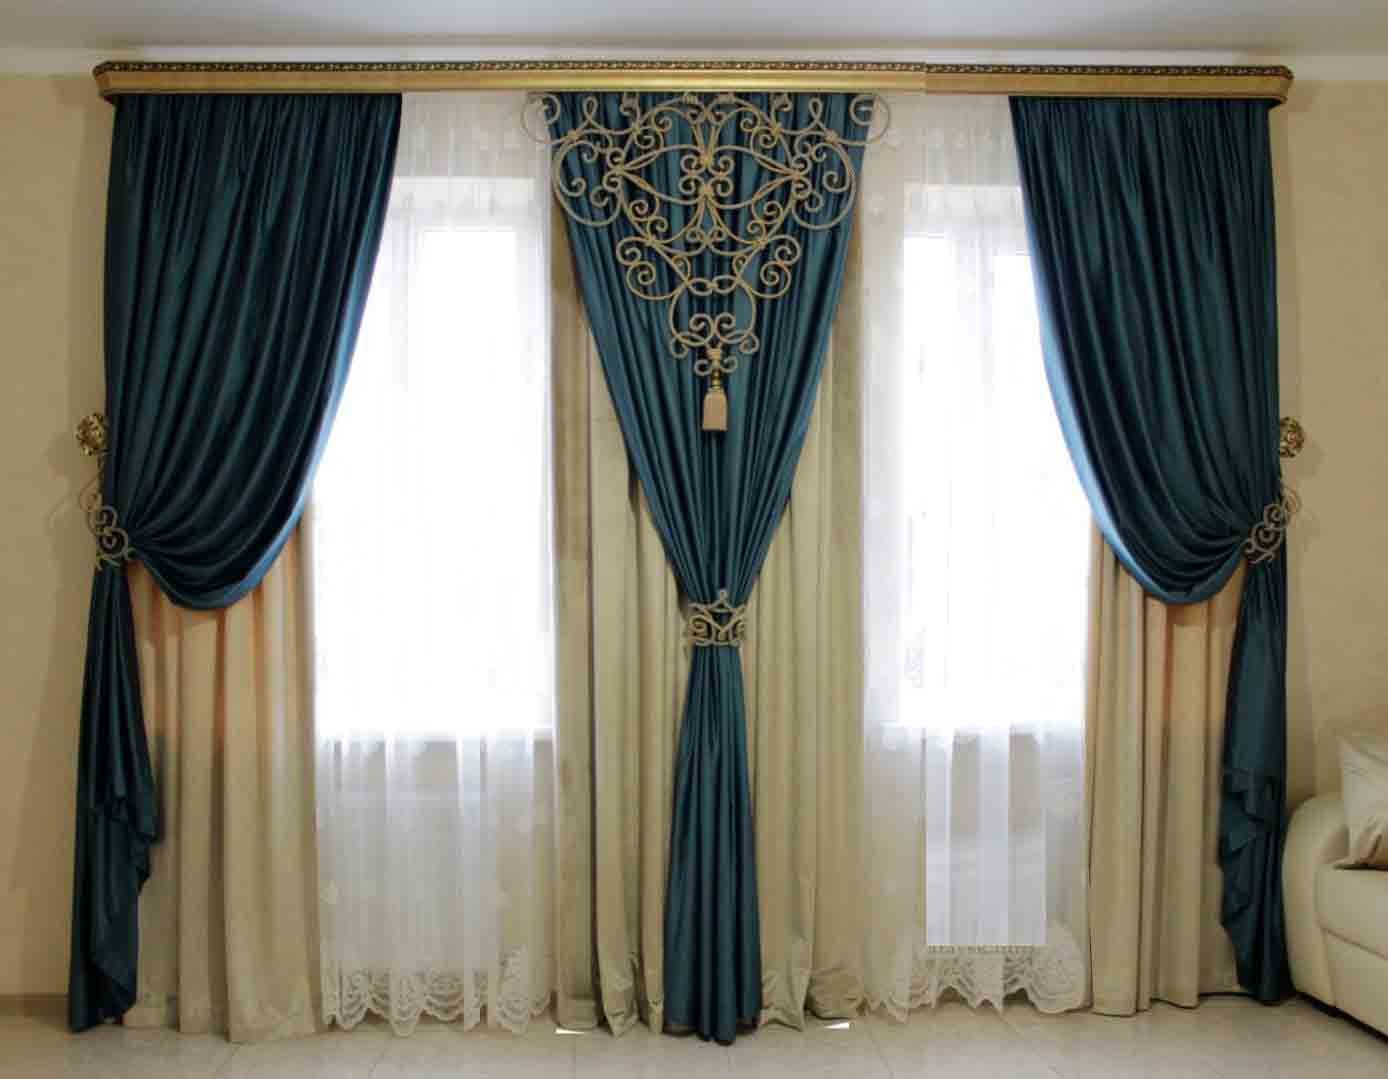 Modern Living Room Decorating Ideas Curtains Luxury 50 Stylish Modern Living Room Curtains Designs Ideas Colors